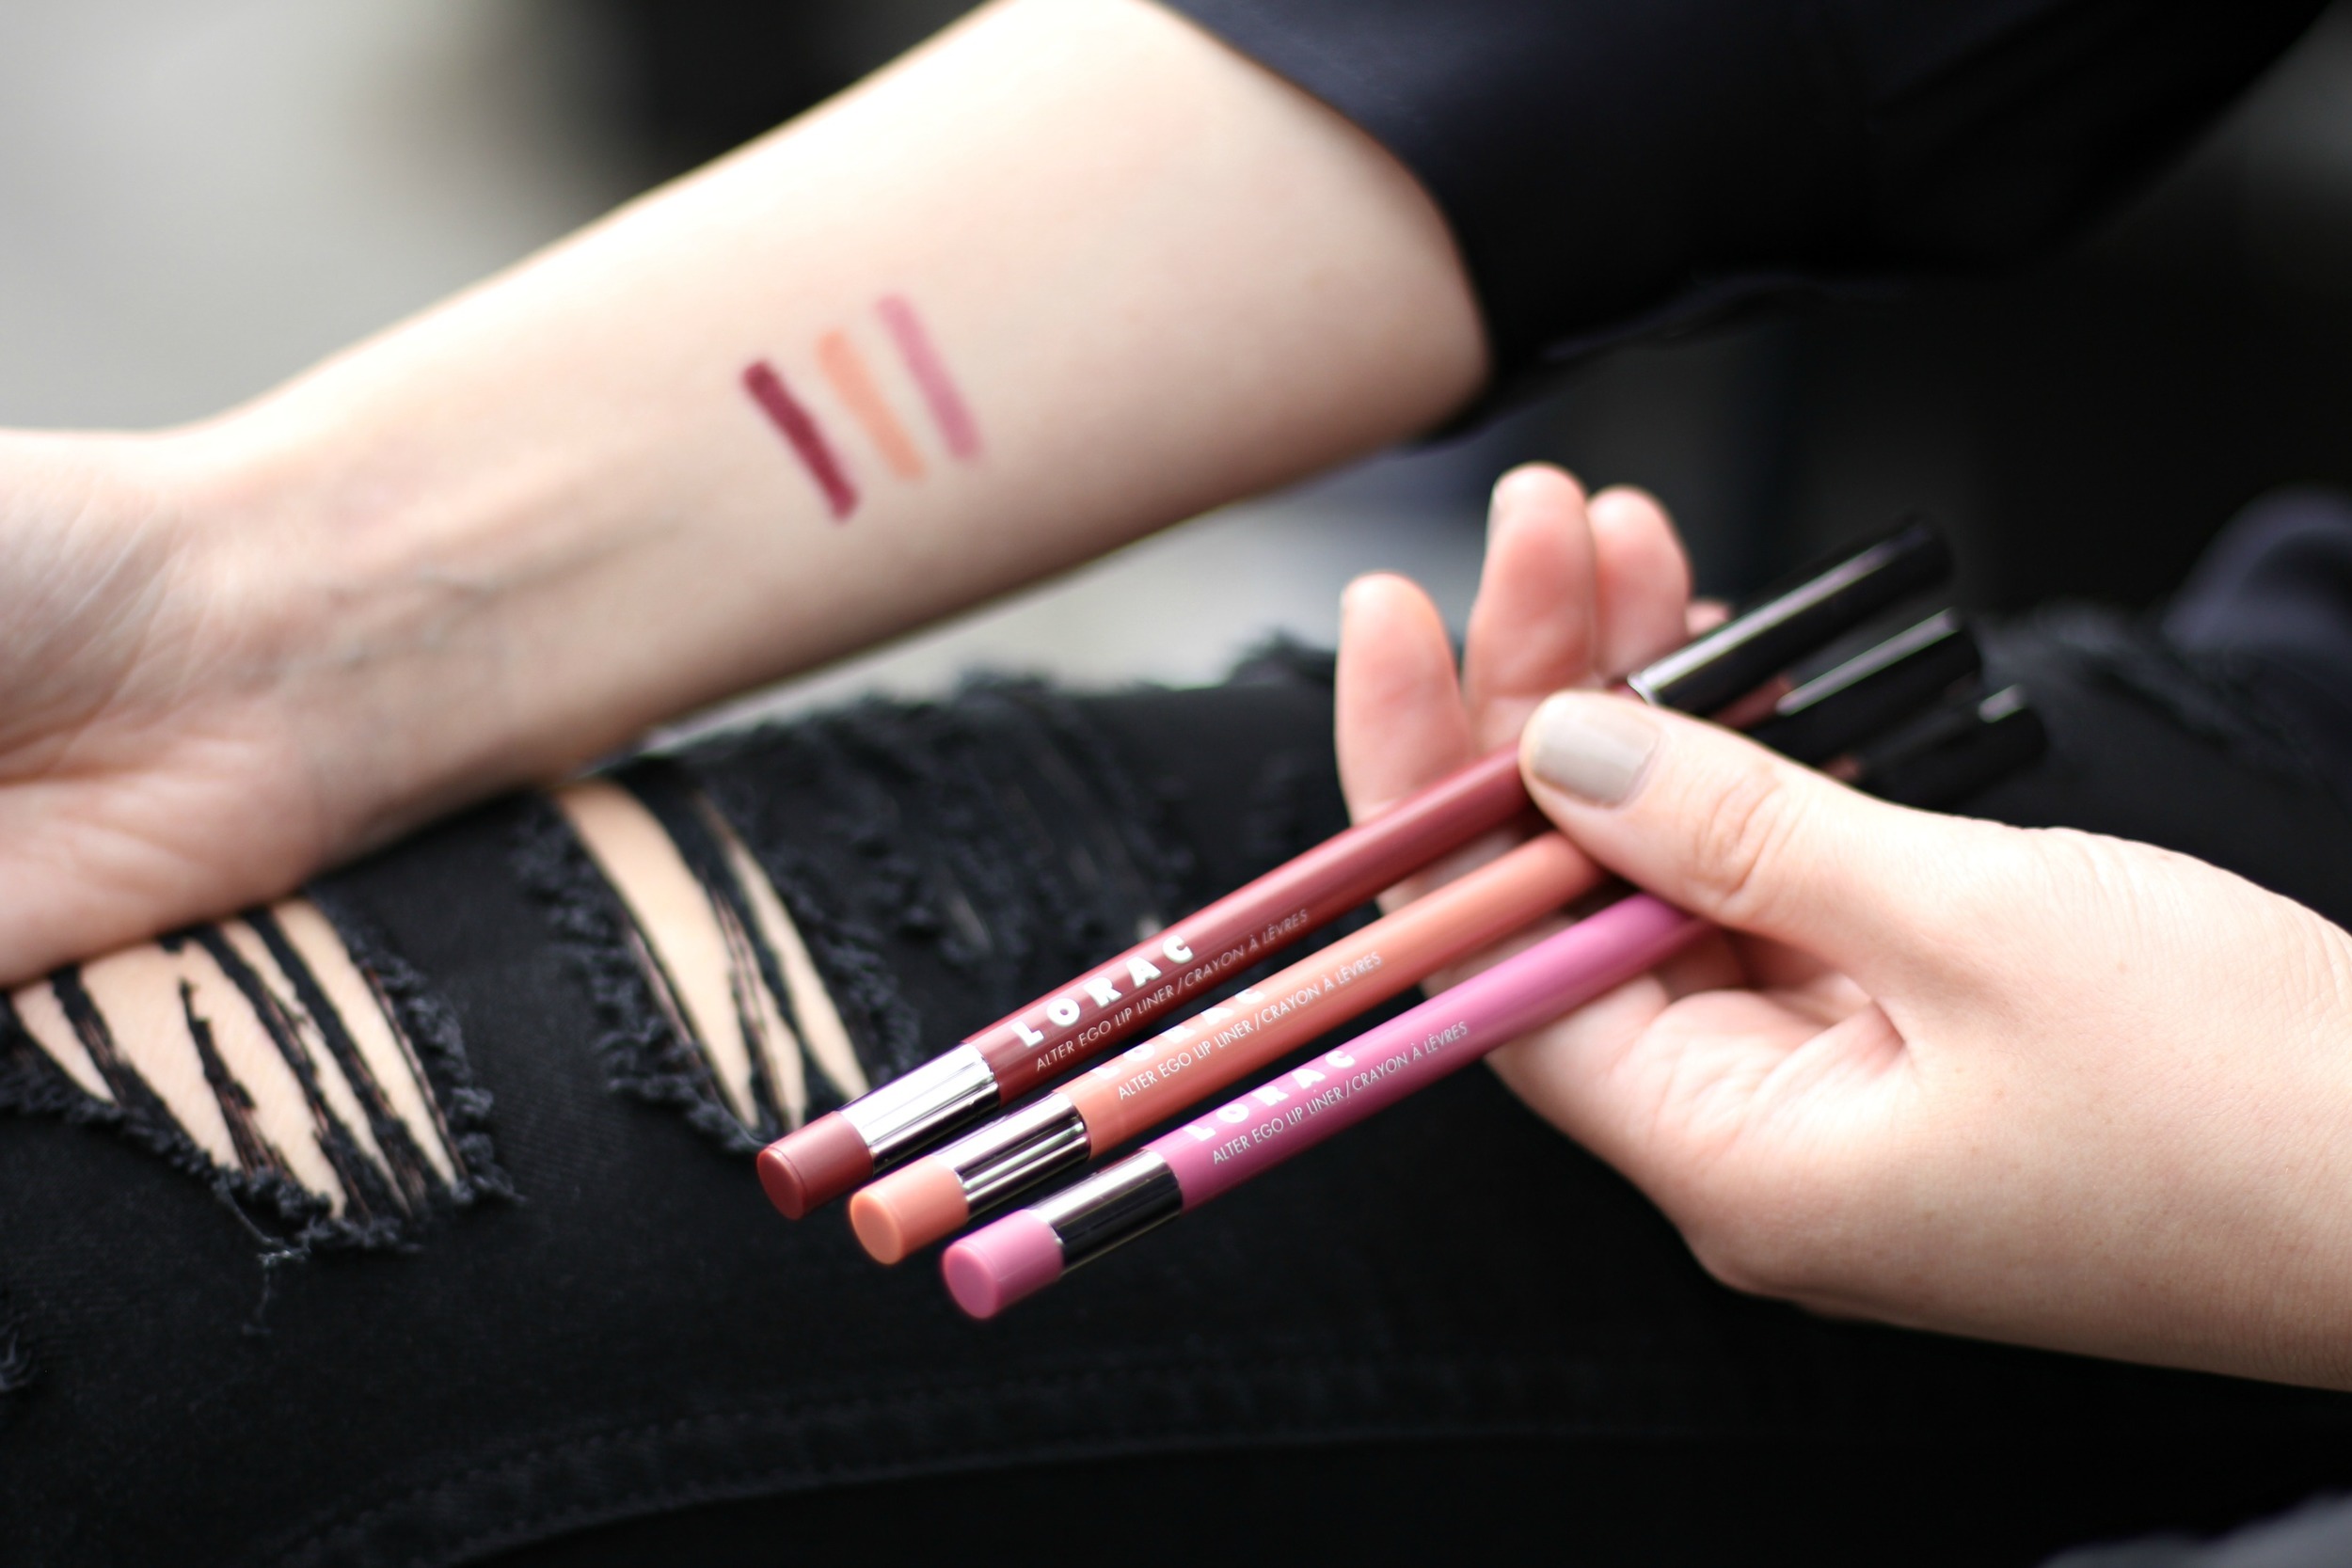 Alter Ego Lip Liners Lorac Louboutins & Love Fashion Blog Esther Santer NYC Street Style Blogger Makeup Look Review Travel Collection Color Burbundy Pink Nude Cosmetics Collab Photography Retractable Pencil Pretty Women Girls Beauty Shop New York City.jpg